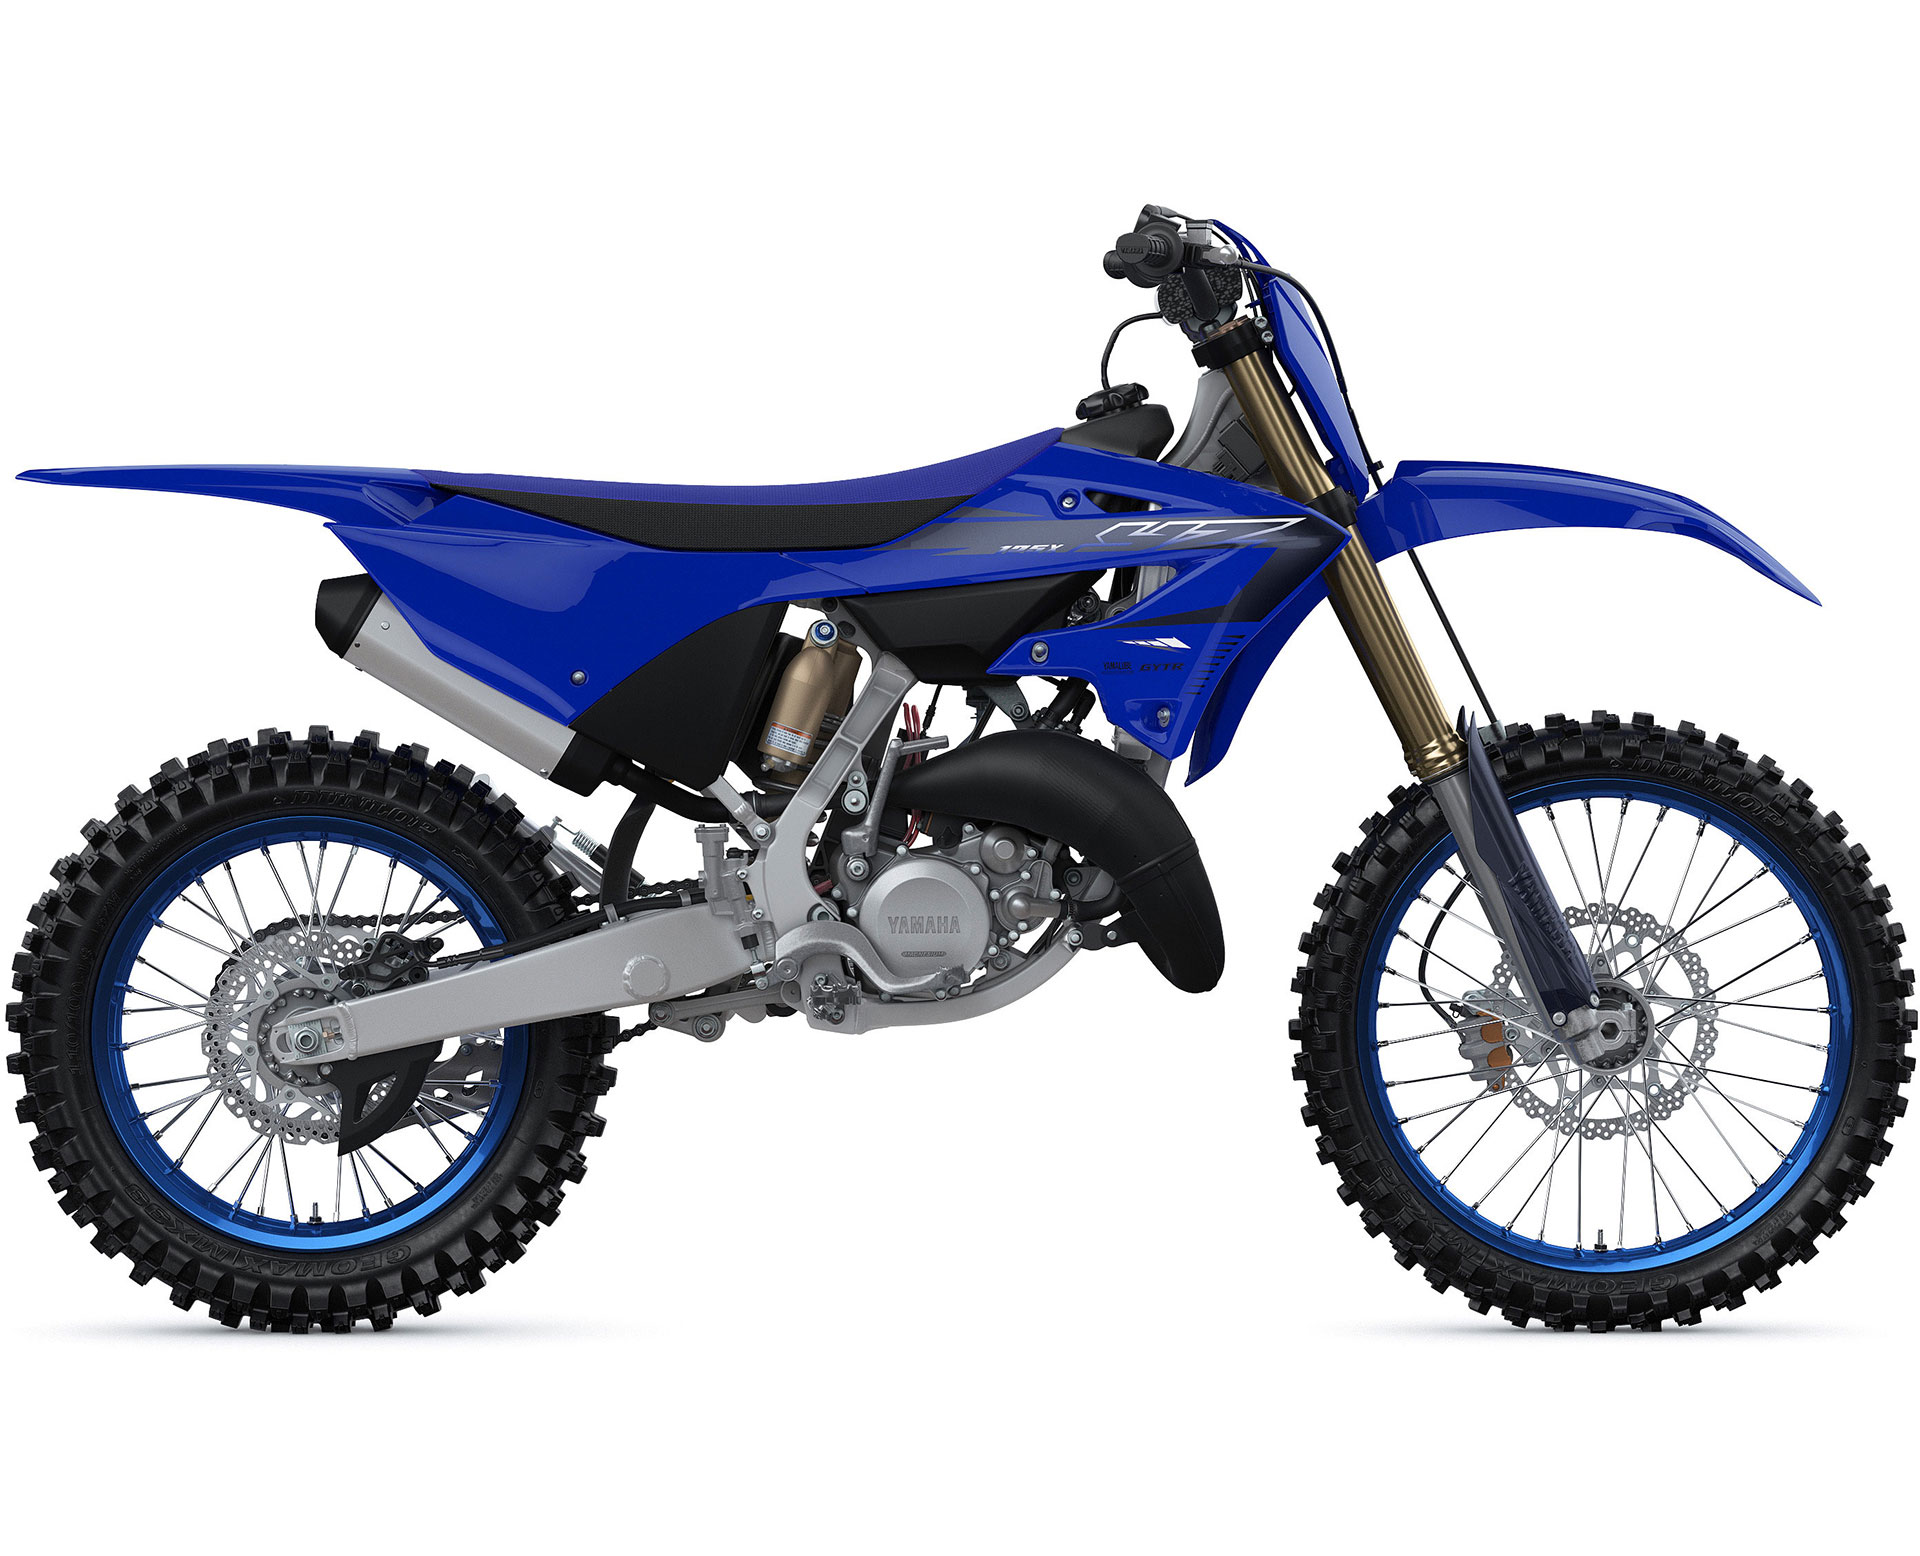 Thumbnail of your customized 2023 YZ125X